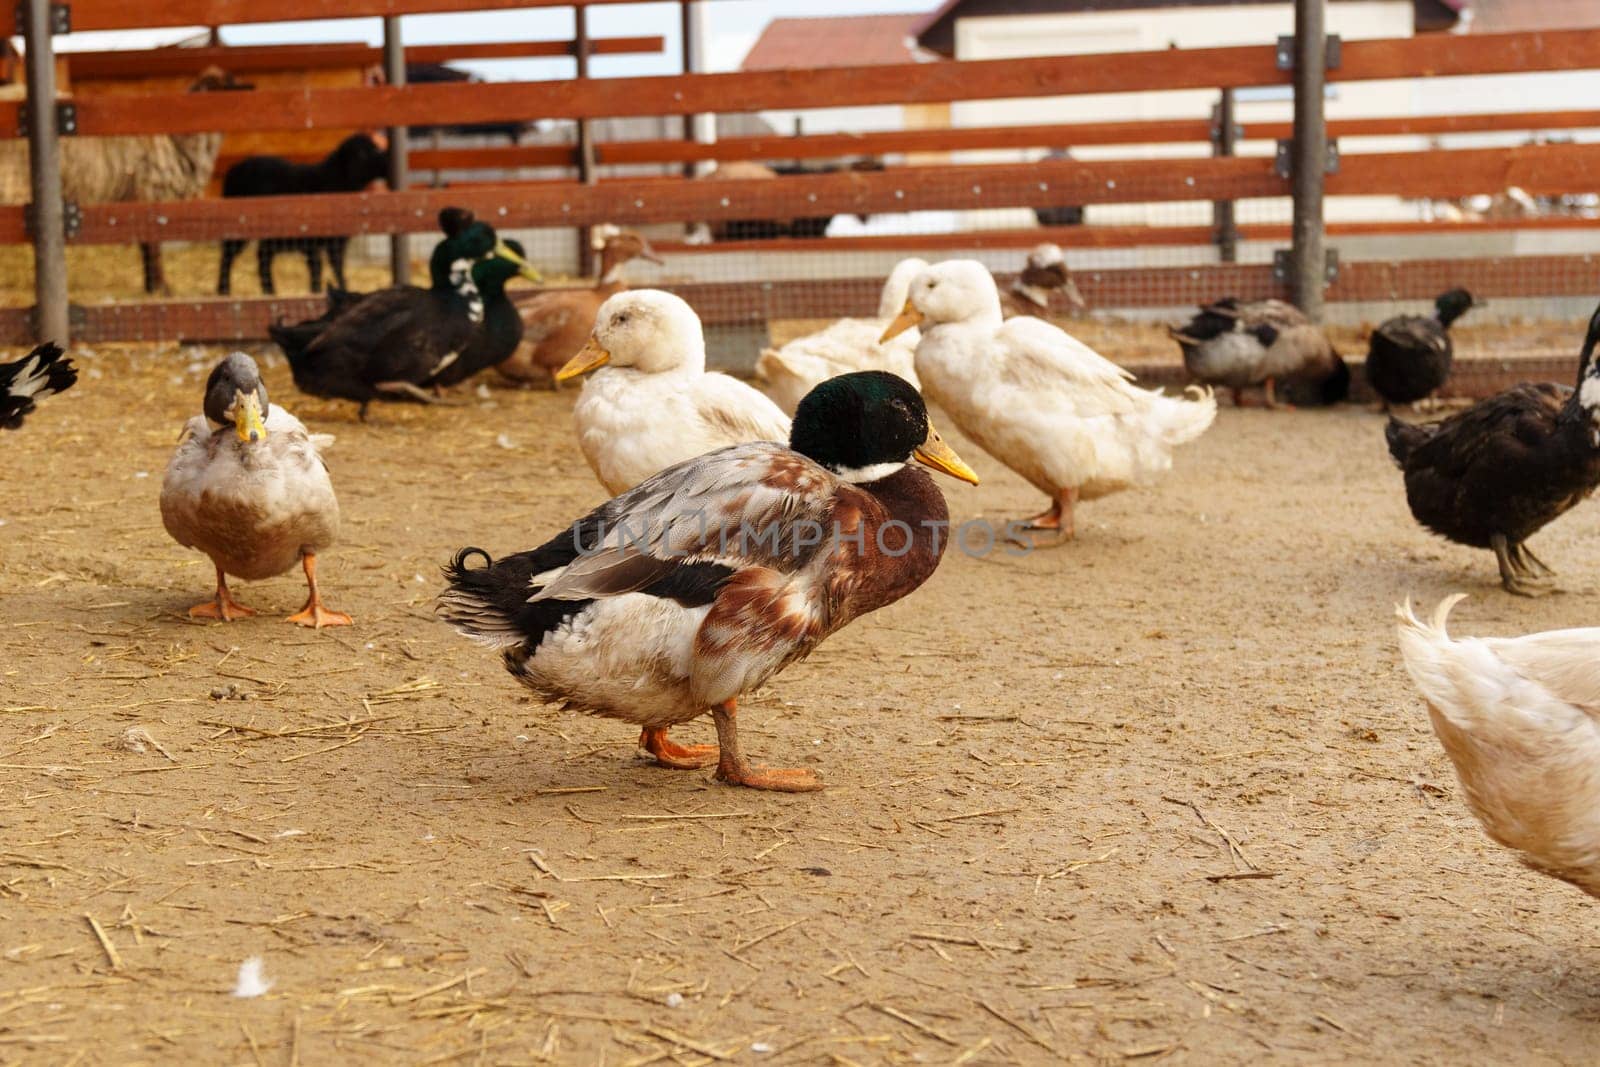 Group of ducks with diverse plumage colors is seen meandering around a farmyard.